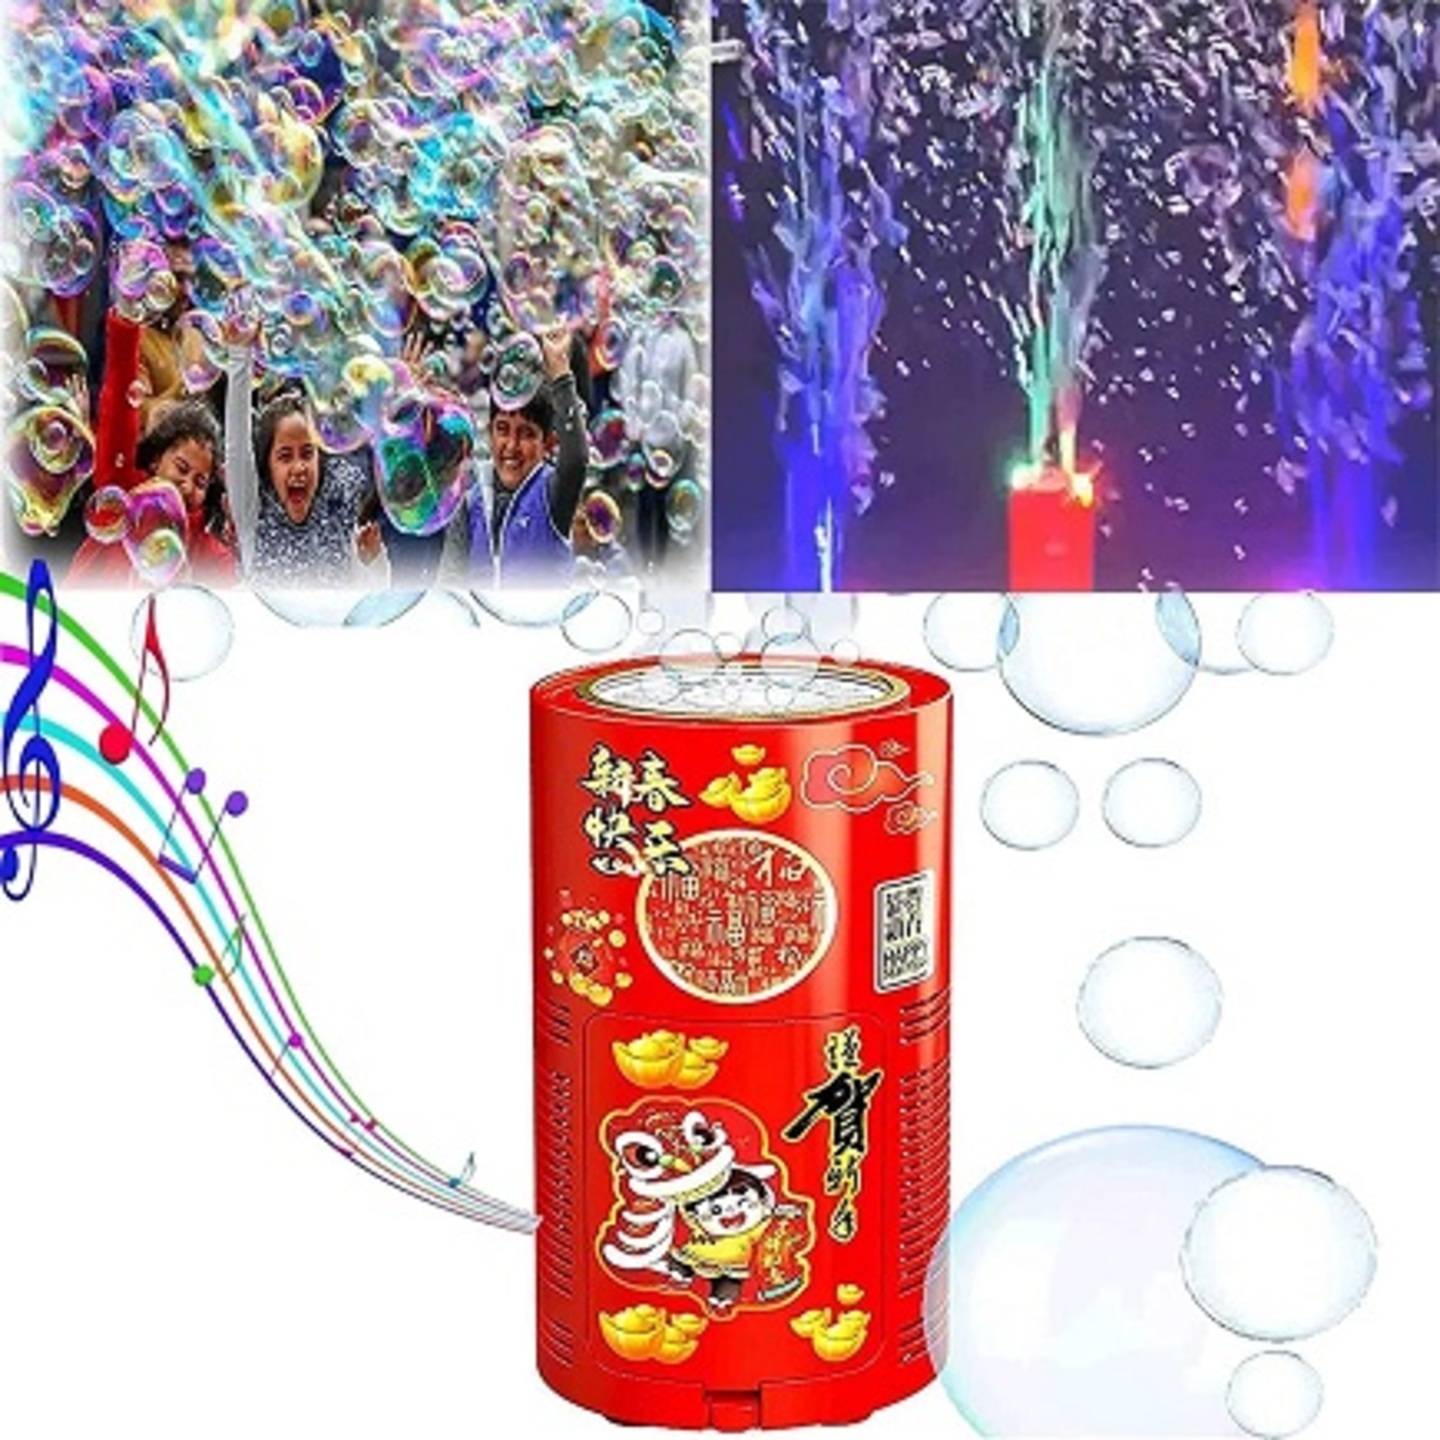 Portable Firework Bubble Machinewith with Light & Music for Birthday Parties and Events